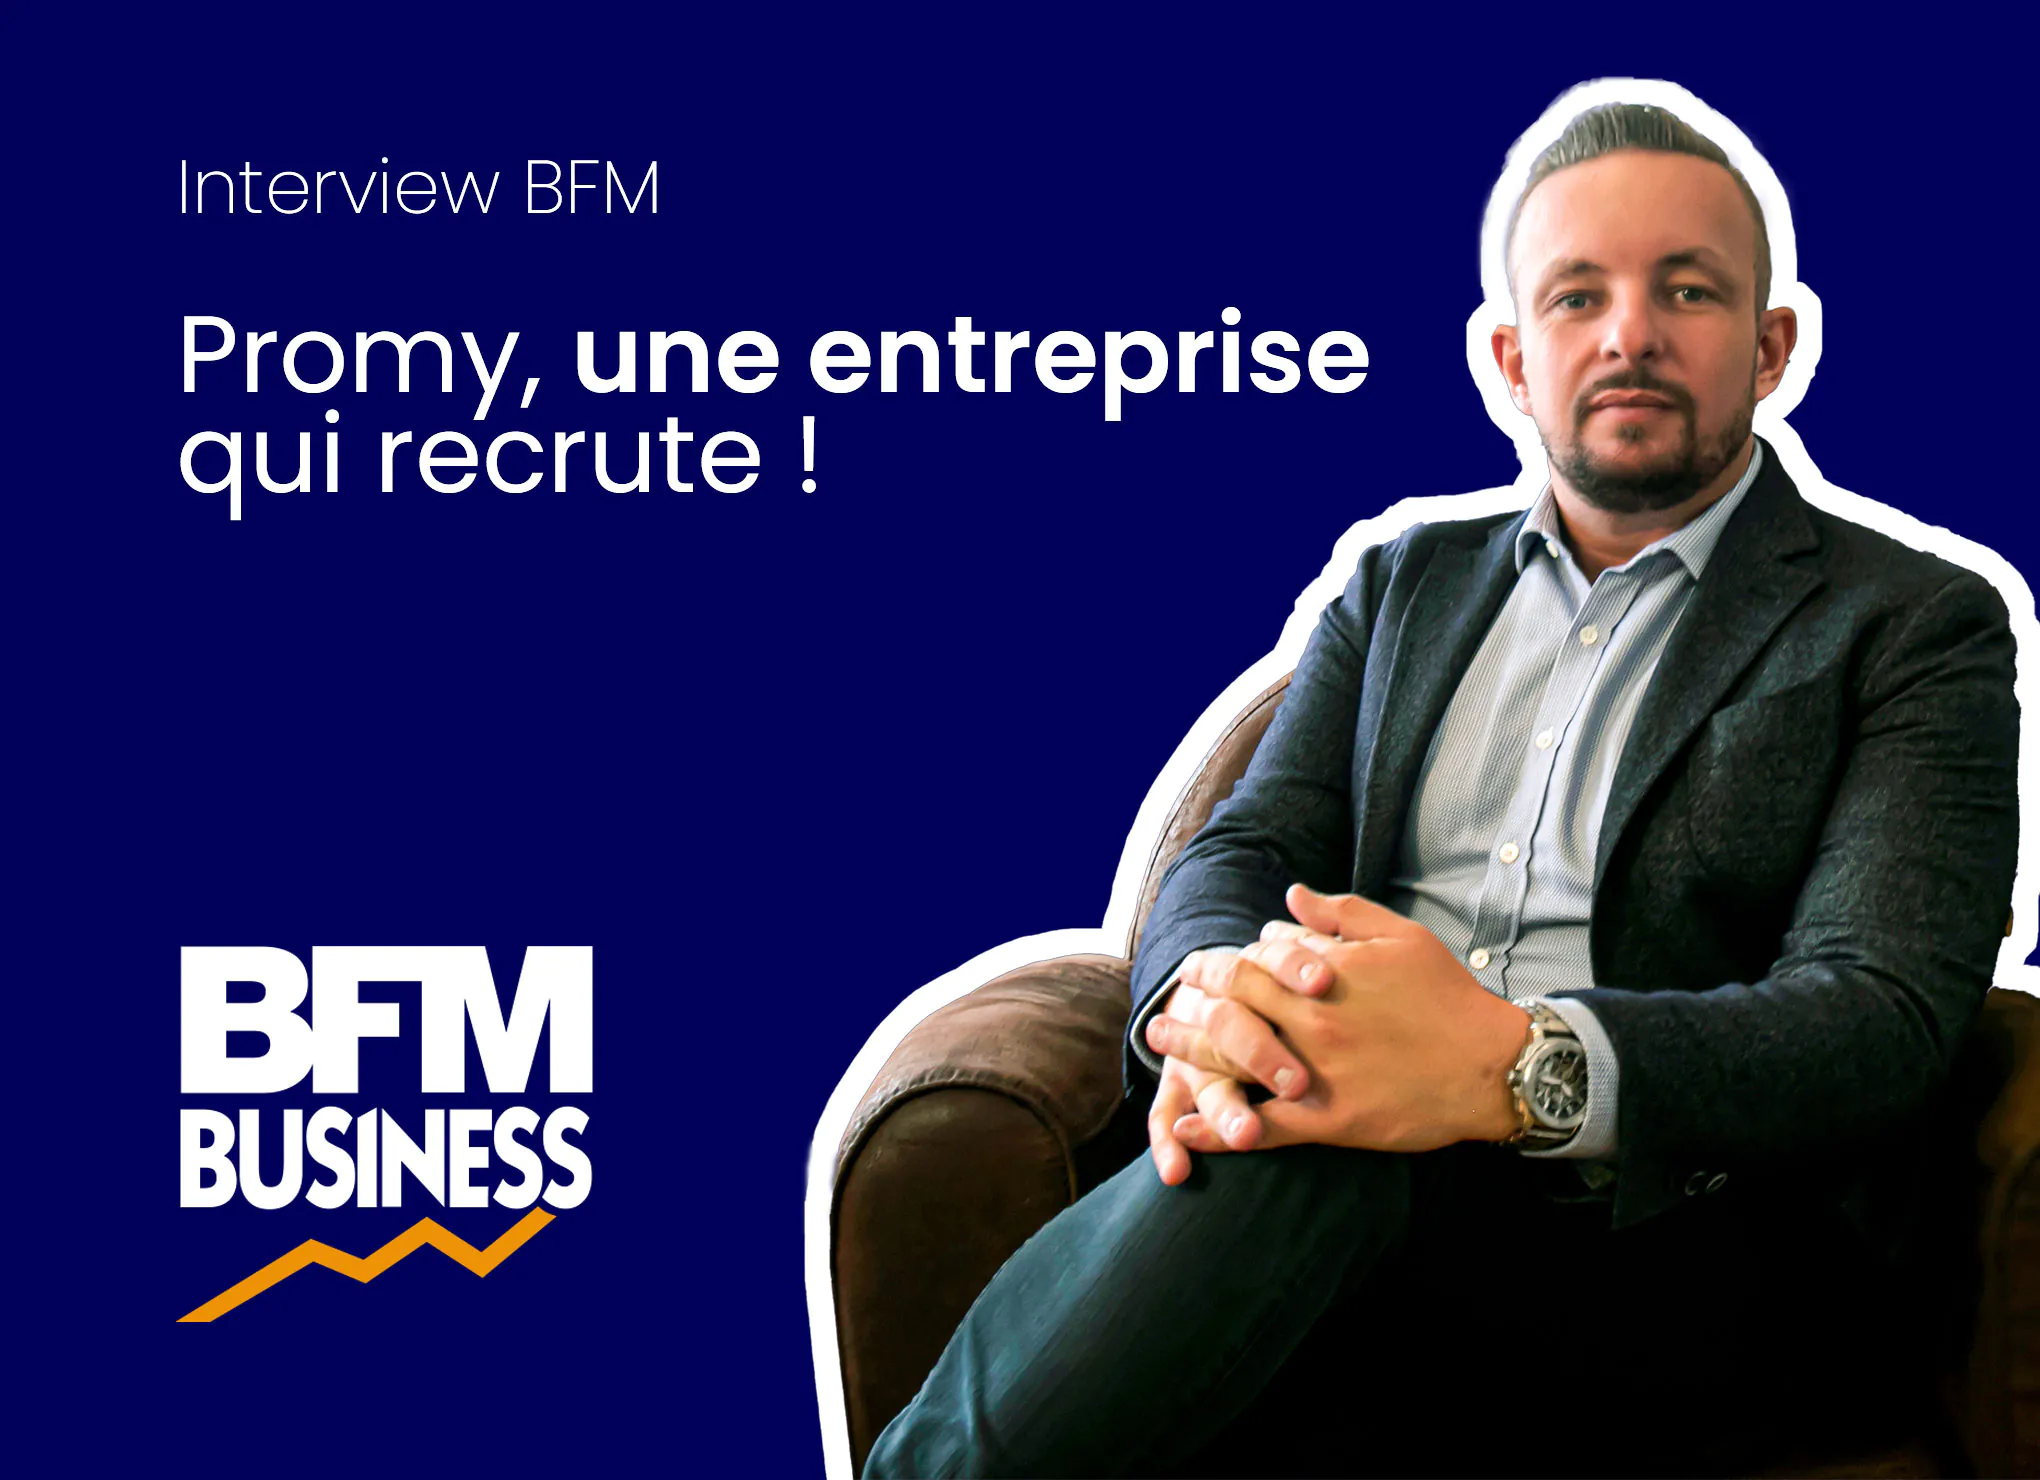 romain-solenne-interview-bfm-business (3)